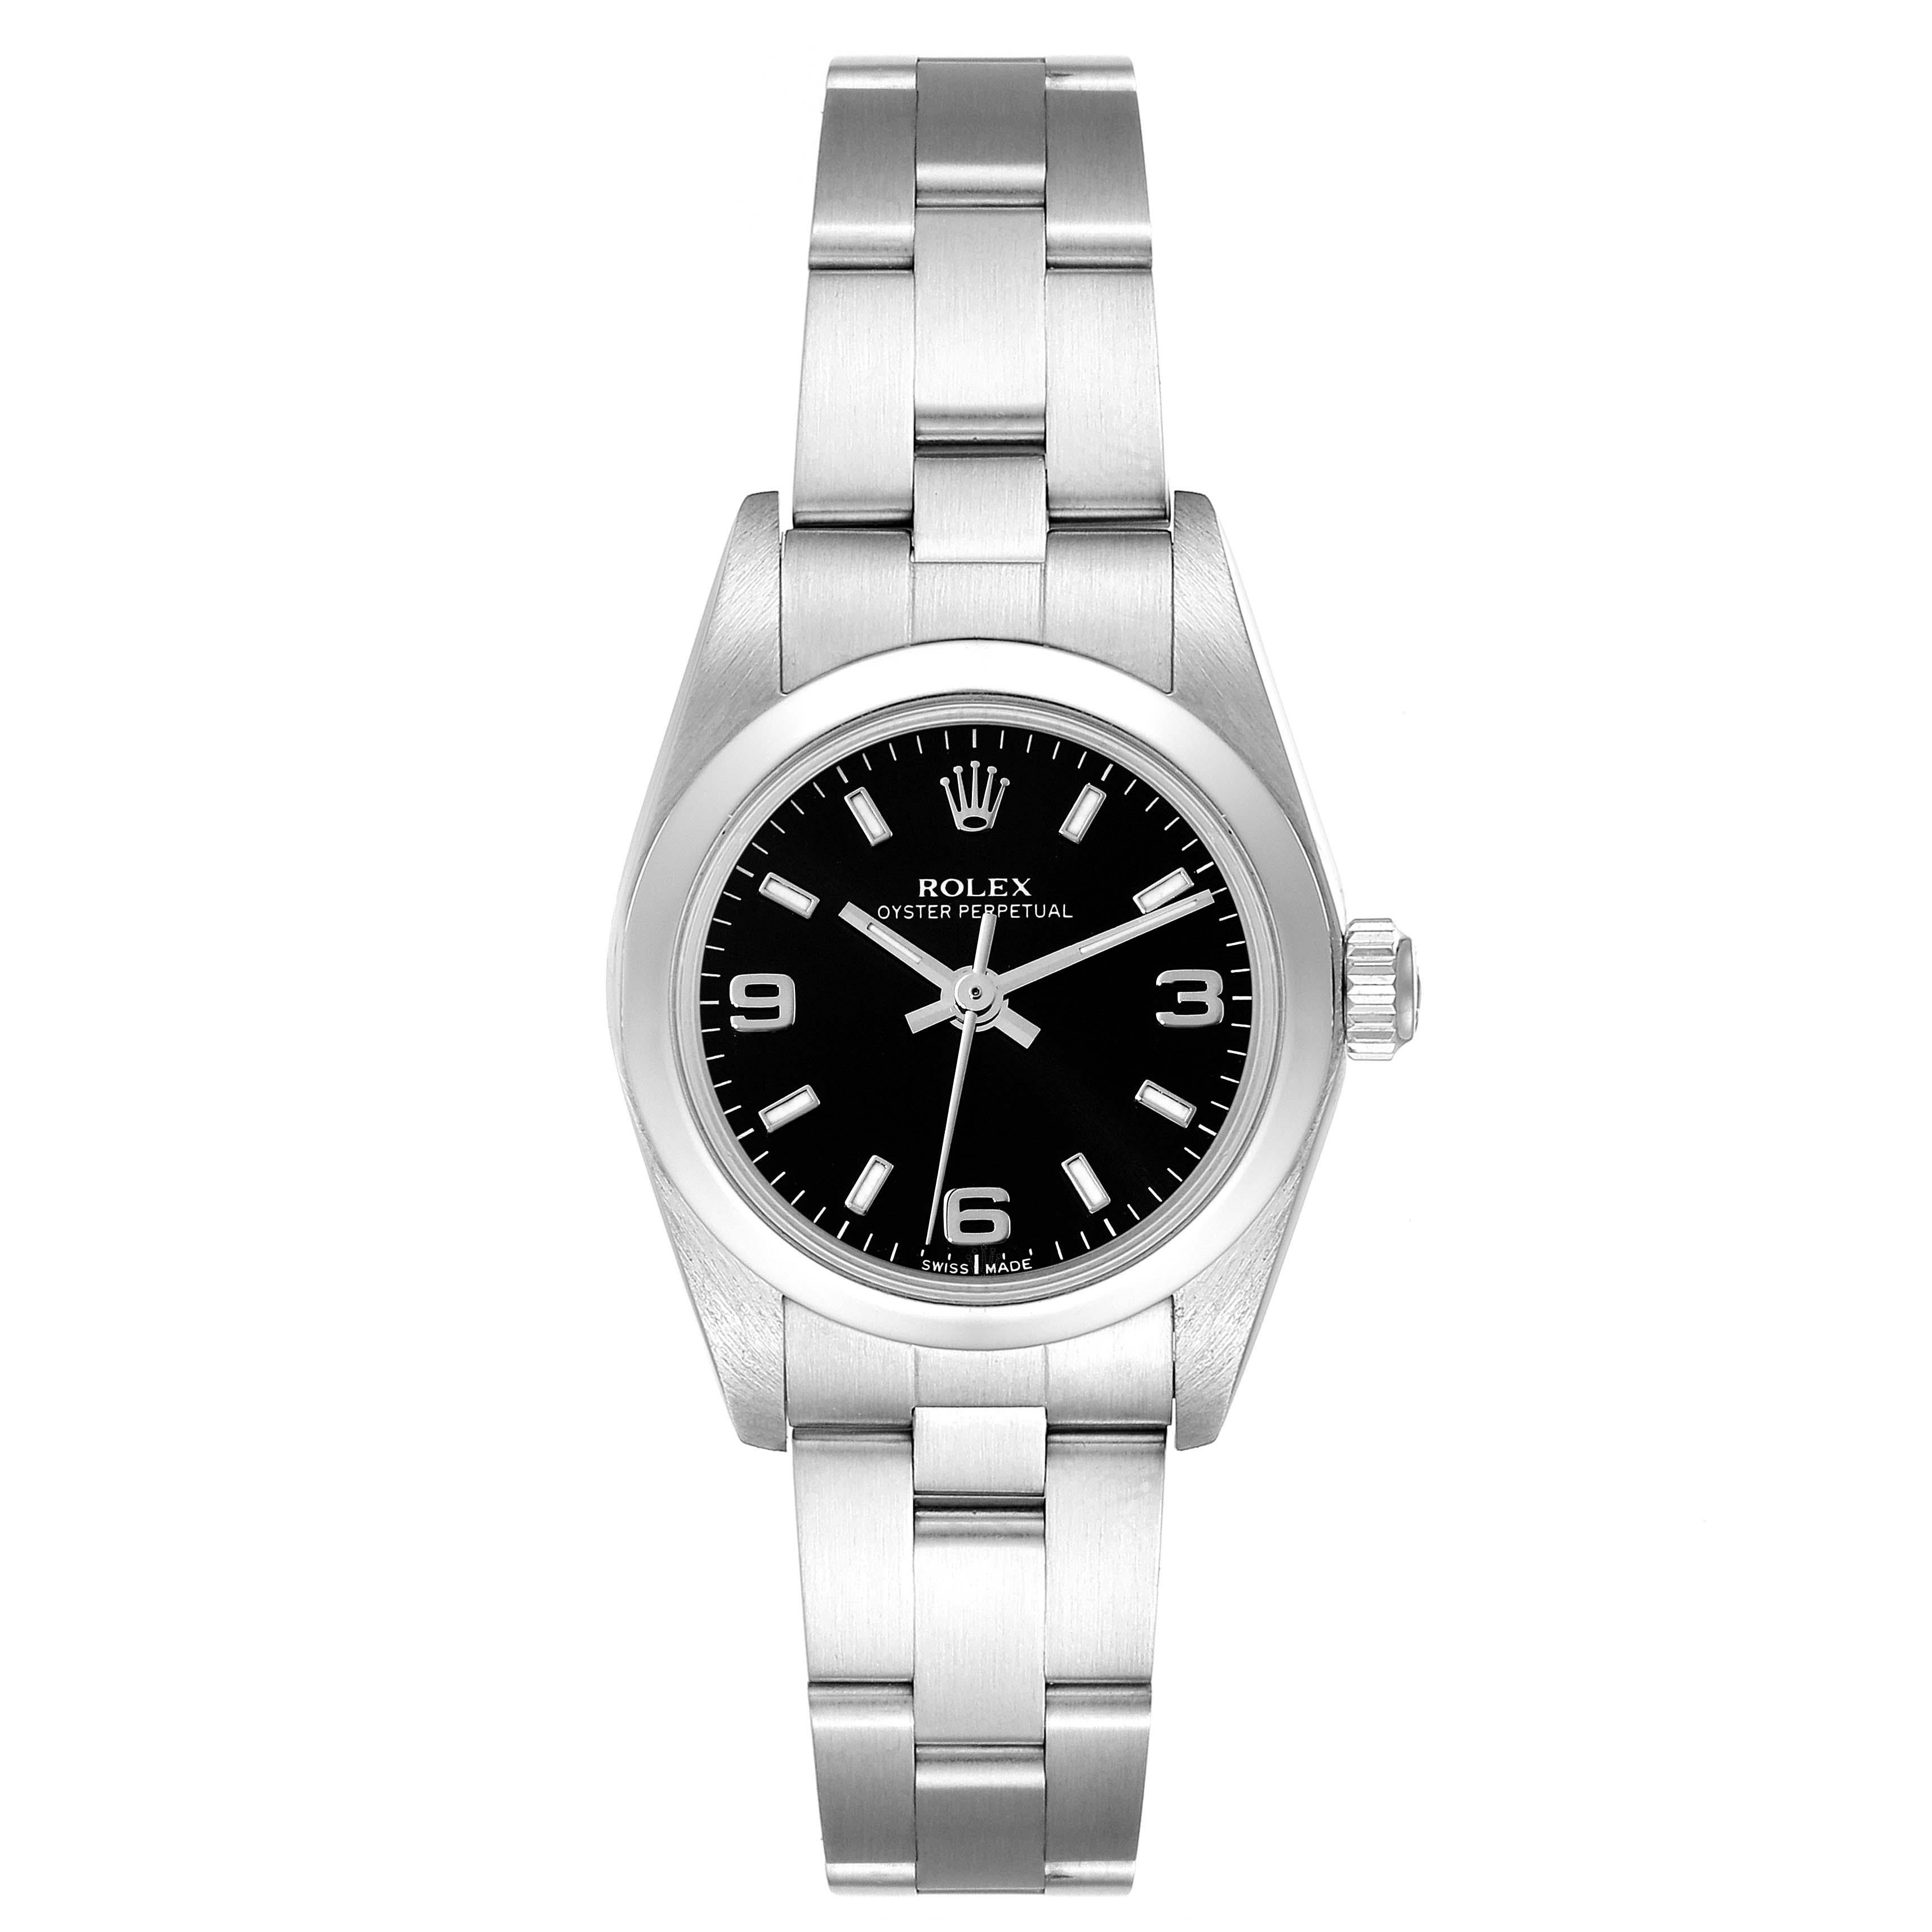 Rolex Oyster Perpetual Nondate Black Dial Steel Ladies Watch 76080. Officially certified chronometer automatic self-winding movement. Stainless steel oyster case 24.0 mm in diameter. Rolex logo on a crown. Stainless steel smooth domed bezel. Scratch